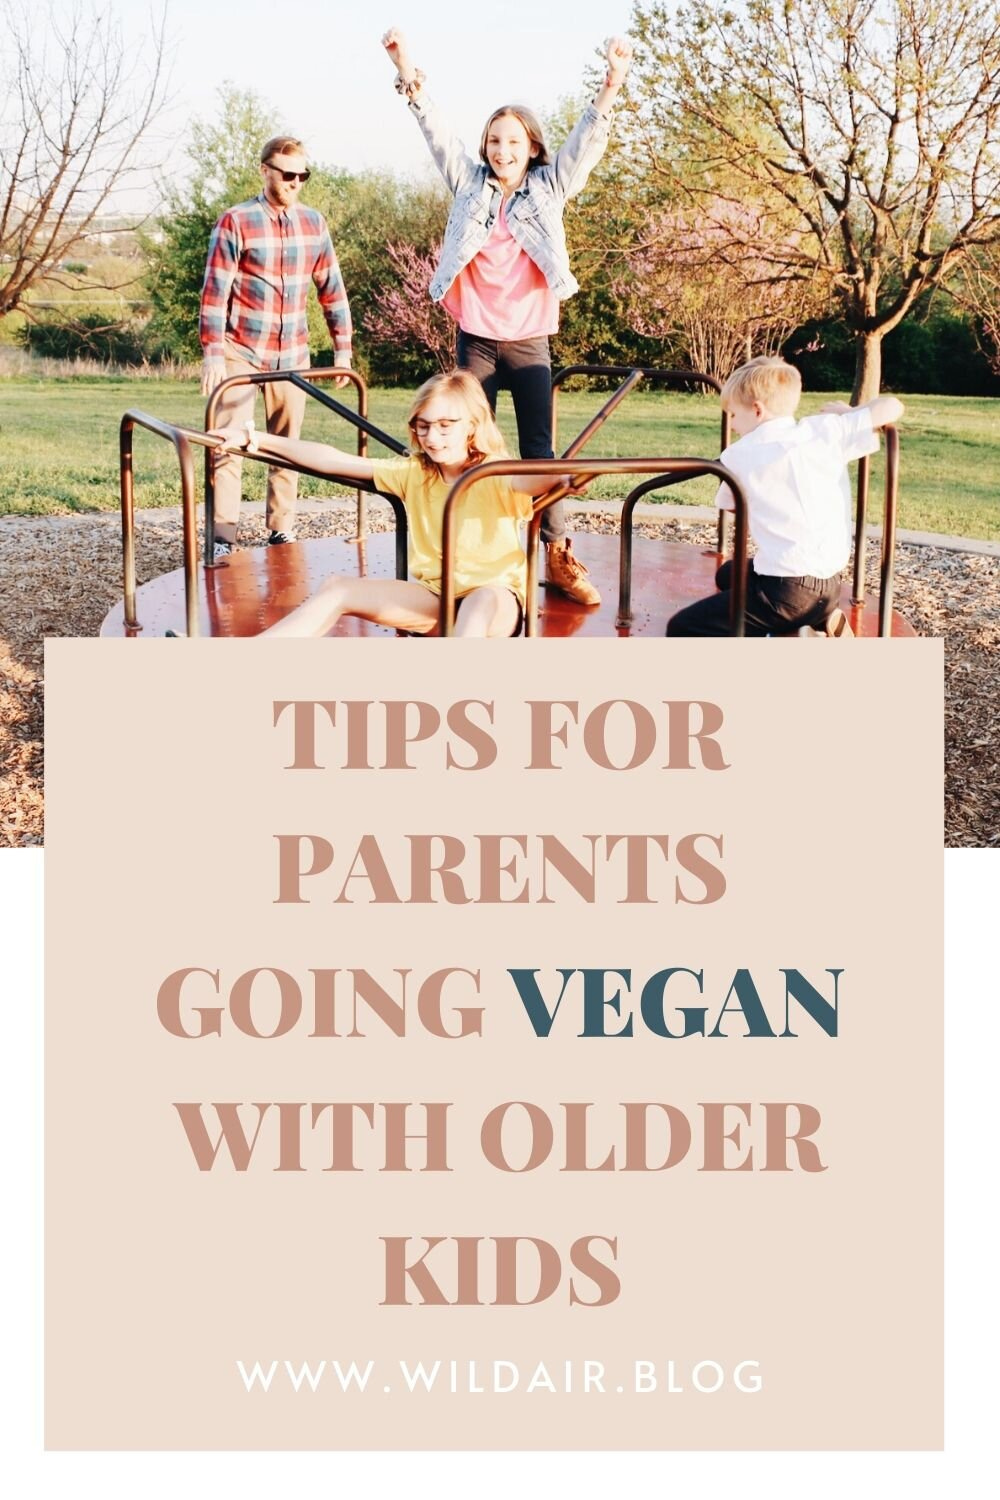 Five tips for the new vegan parent. This post will help you on your new journey of becoming a vegan with older children. #veganfamily #vegan #plantbased